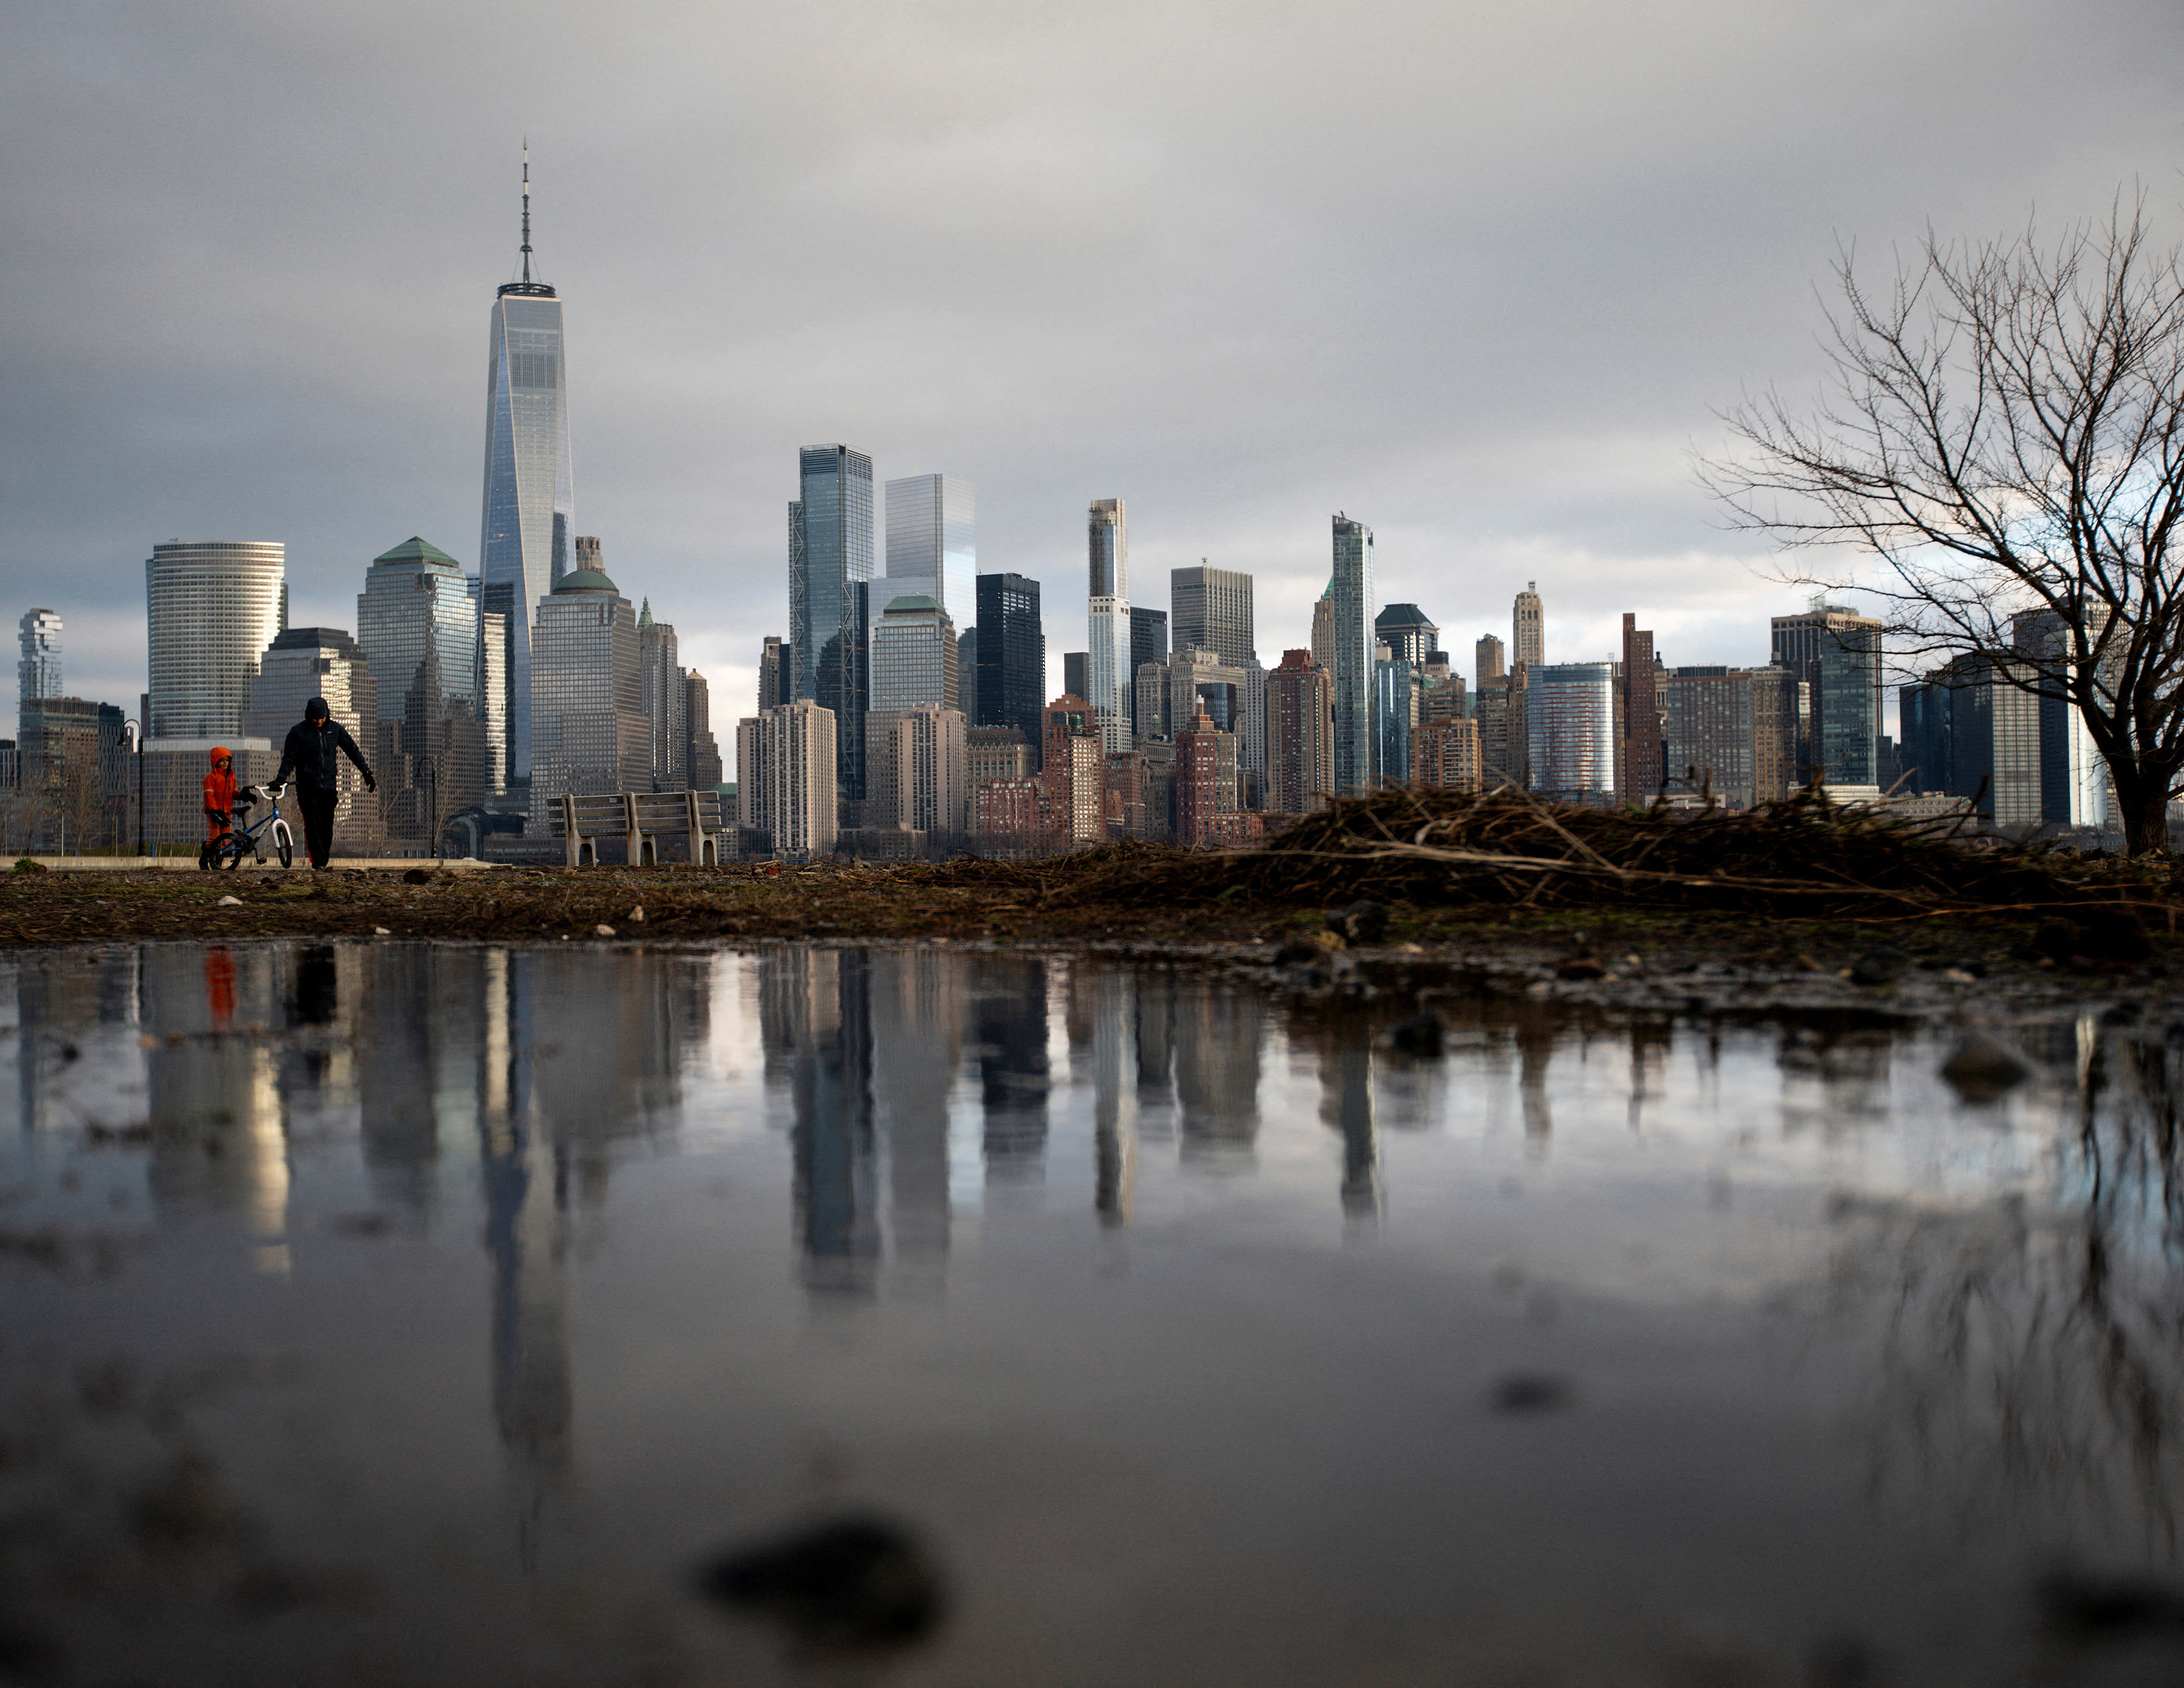 People walk near the shore in a local park in Jersey City, New Jersey, while storm clouds pass by the One World Trade Center in New York